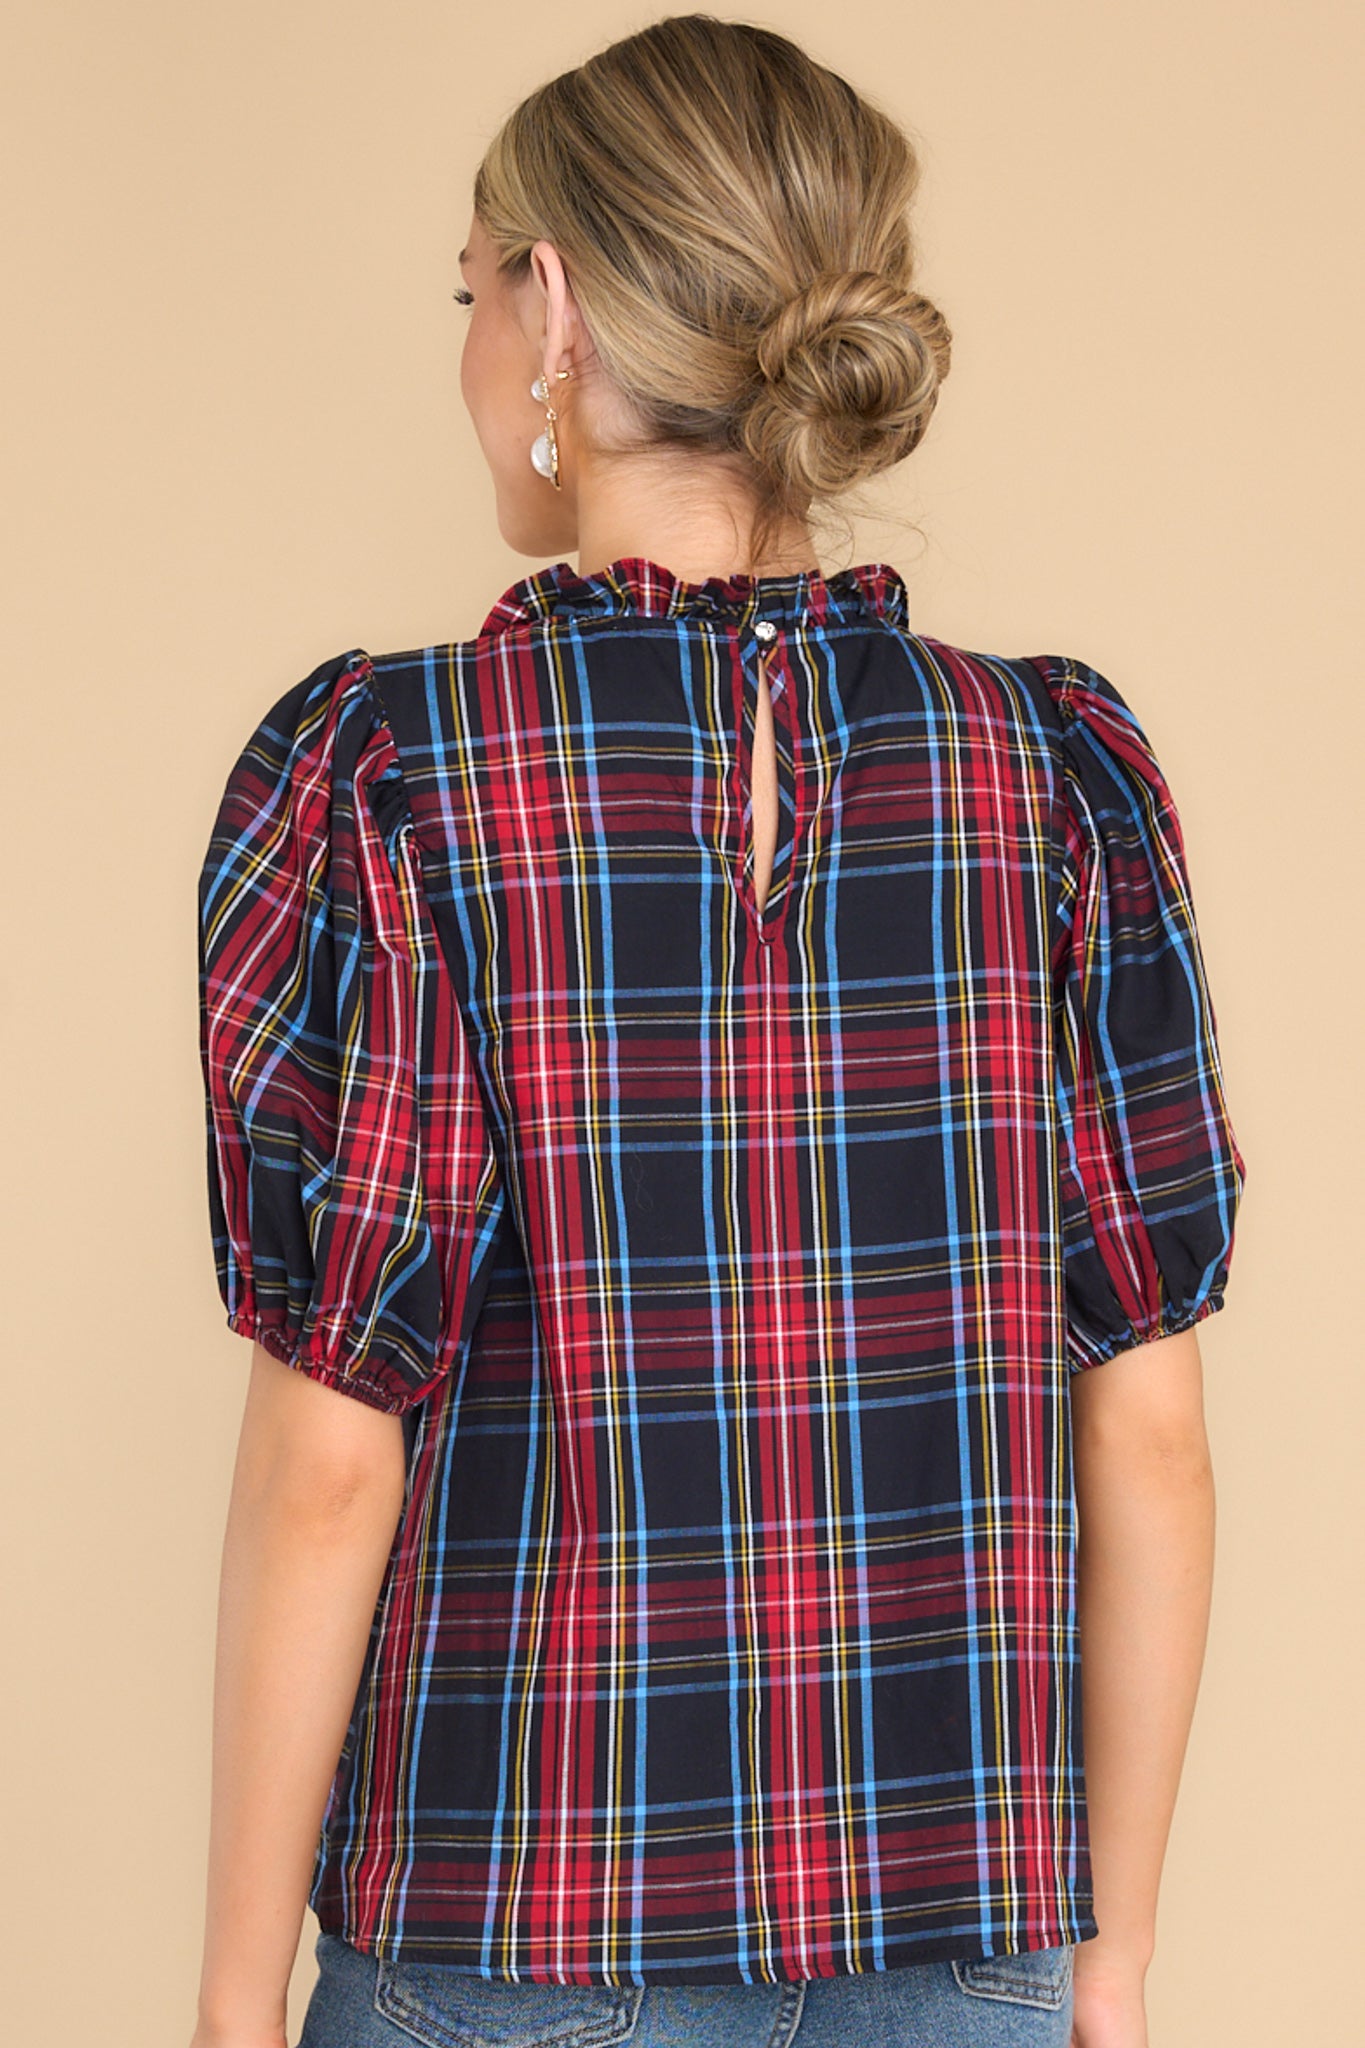 Back view of this top that features a ruffled neckline, a keyhole closure in the back, elastic cuffed puffy sleeves, and a plaid pattern.